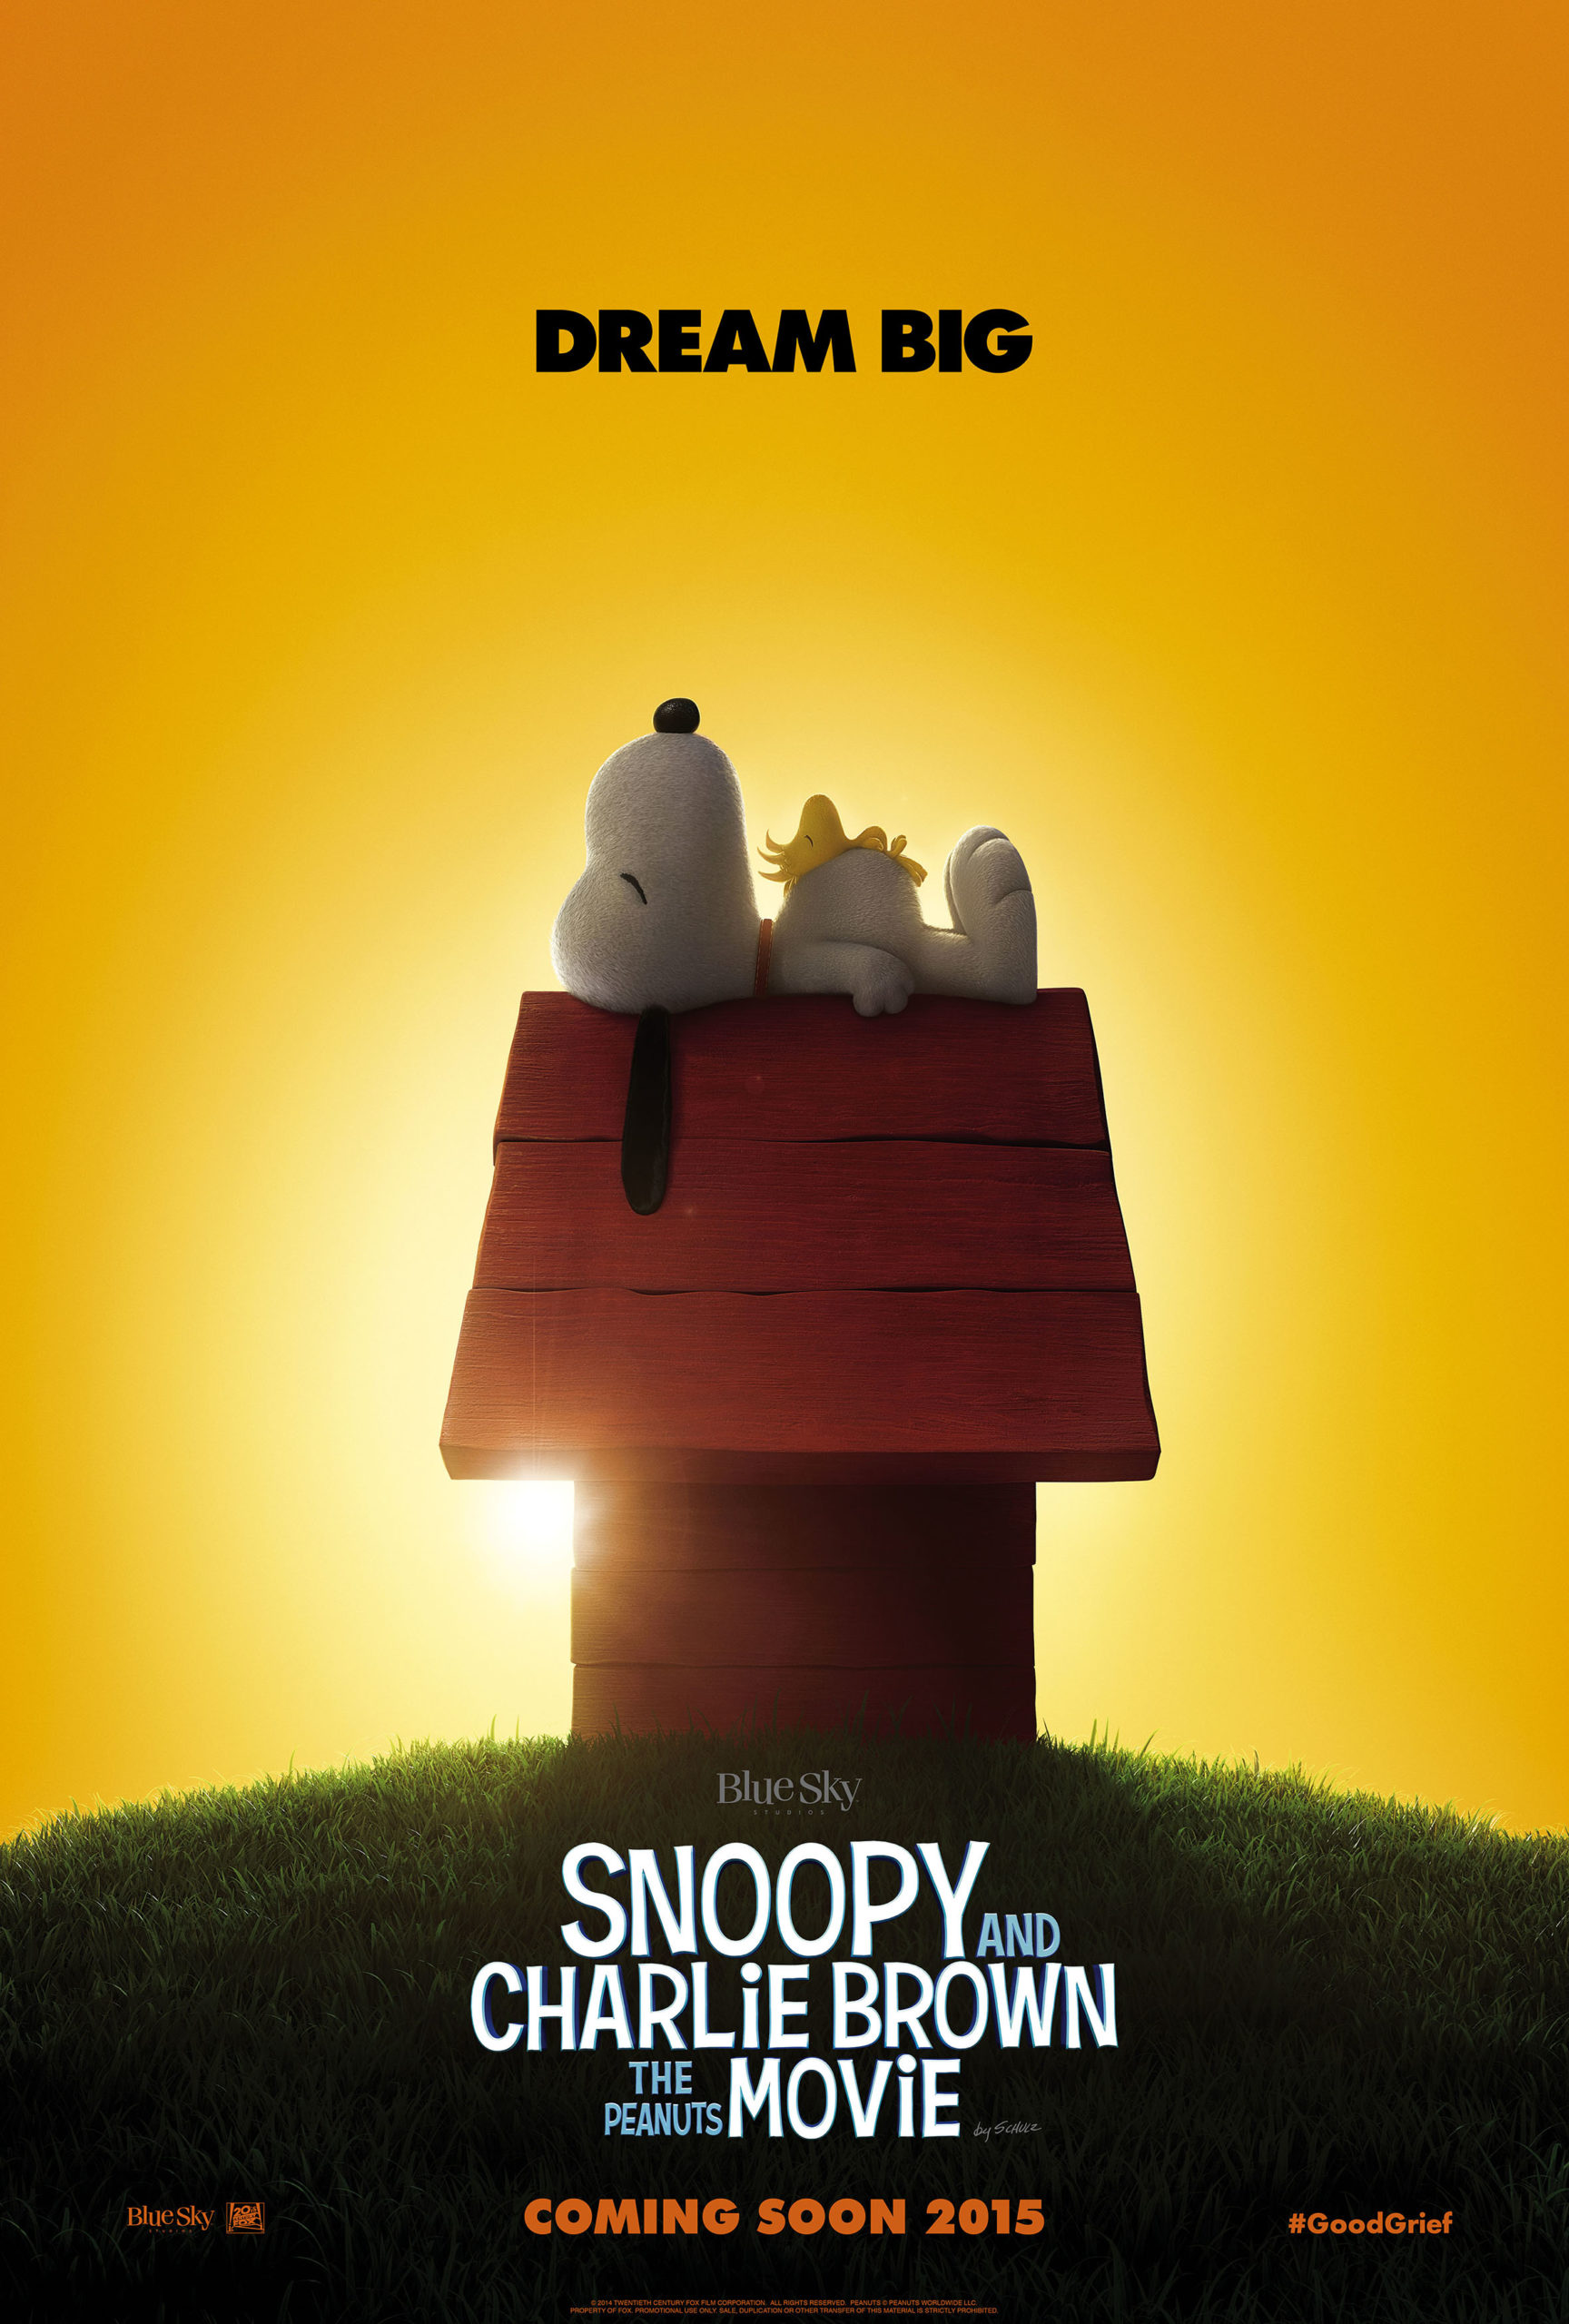 Snoopy Looks So Good In This Movie Poster